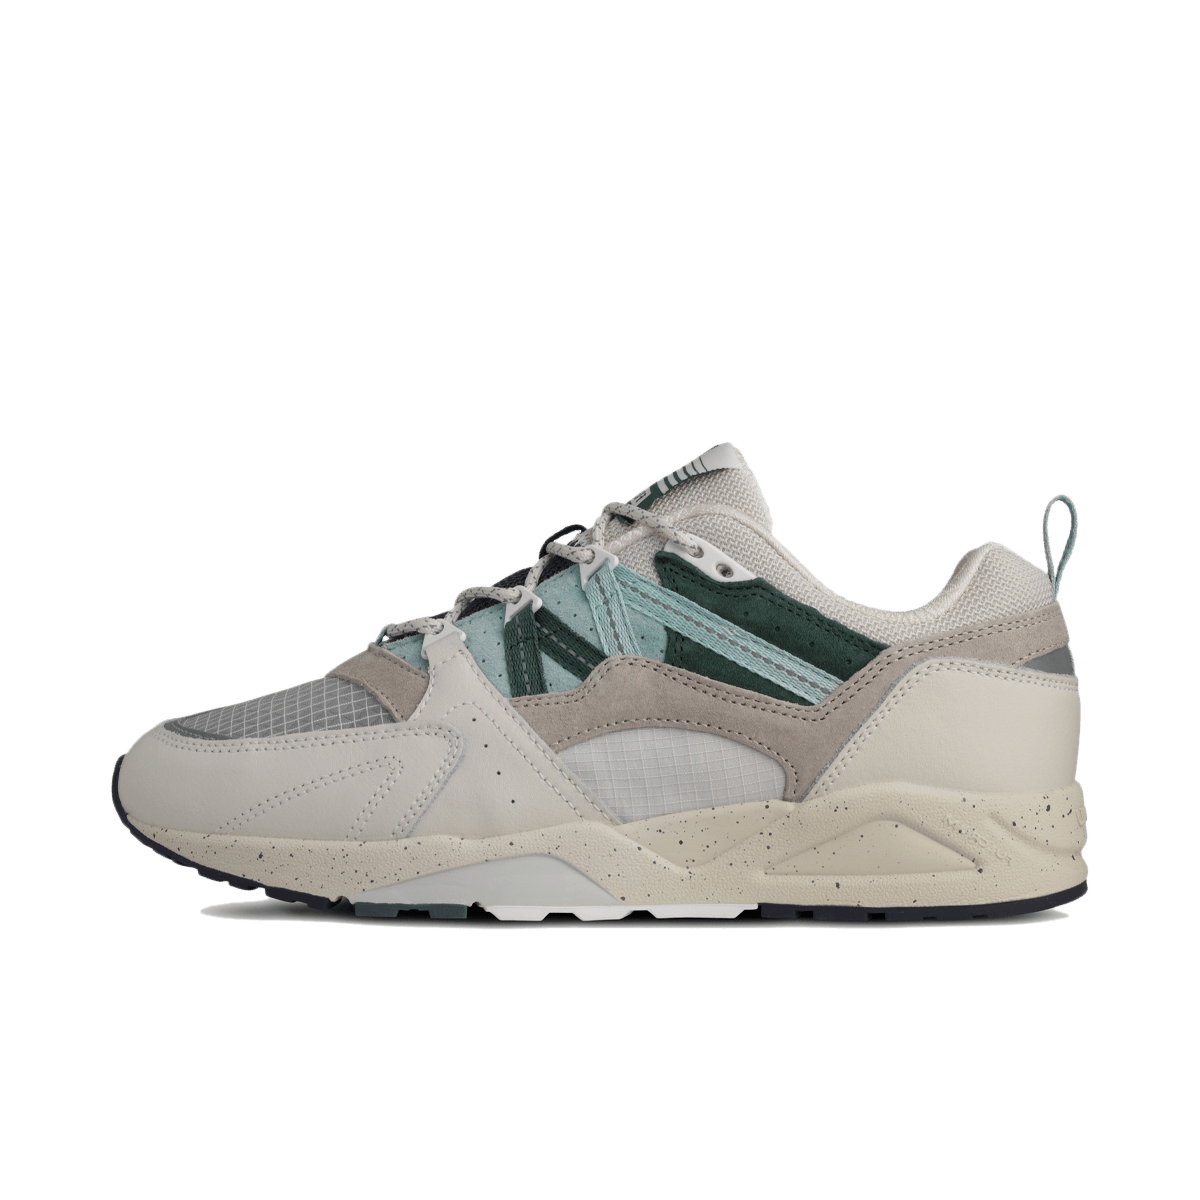 Karhu Fusion 2.0 'Lily White' - Flow State Pack